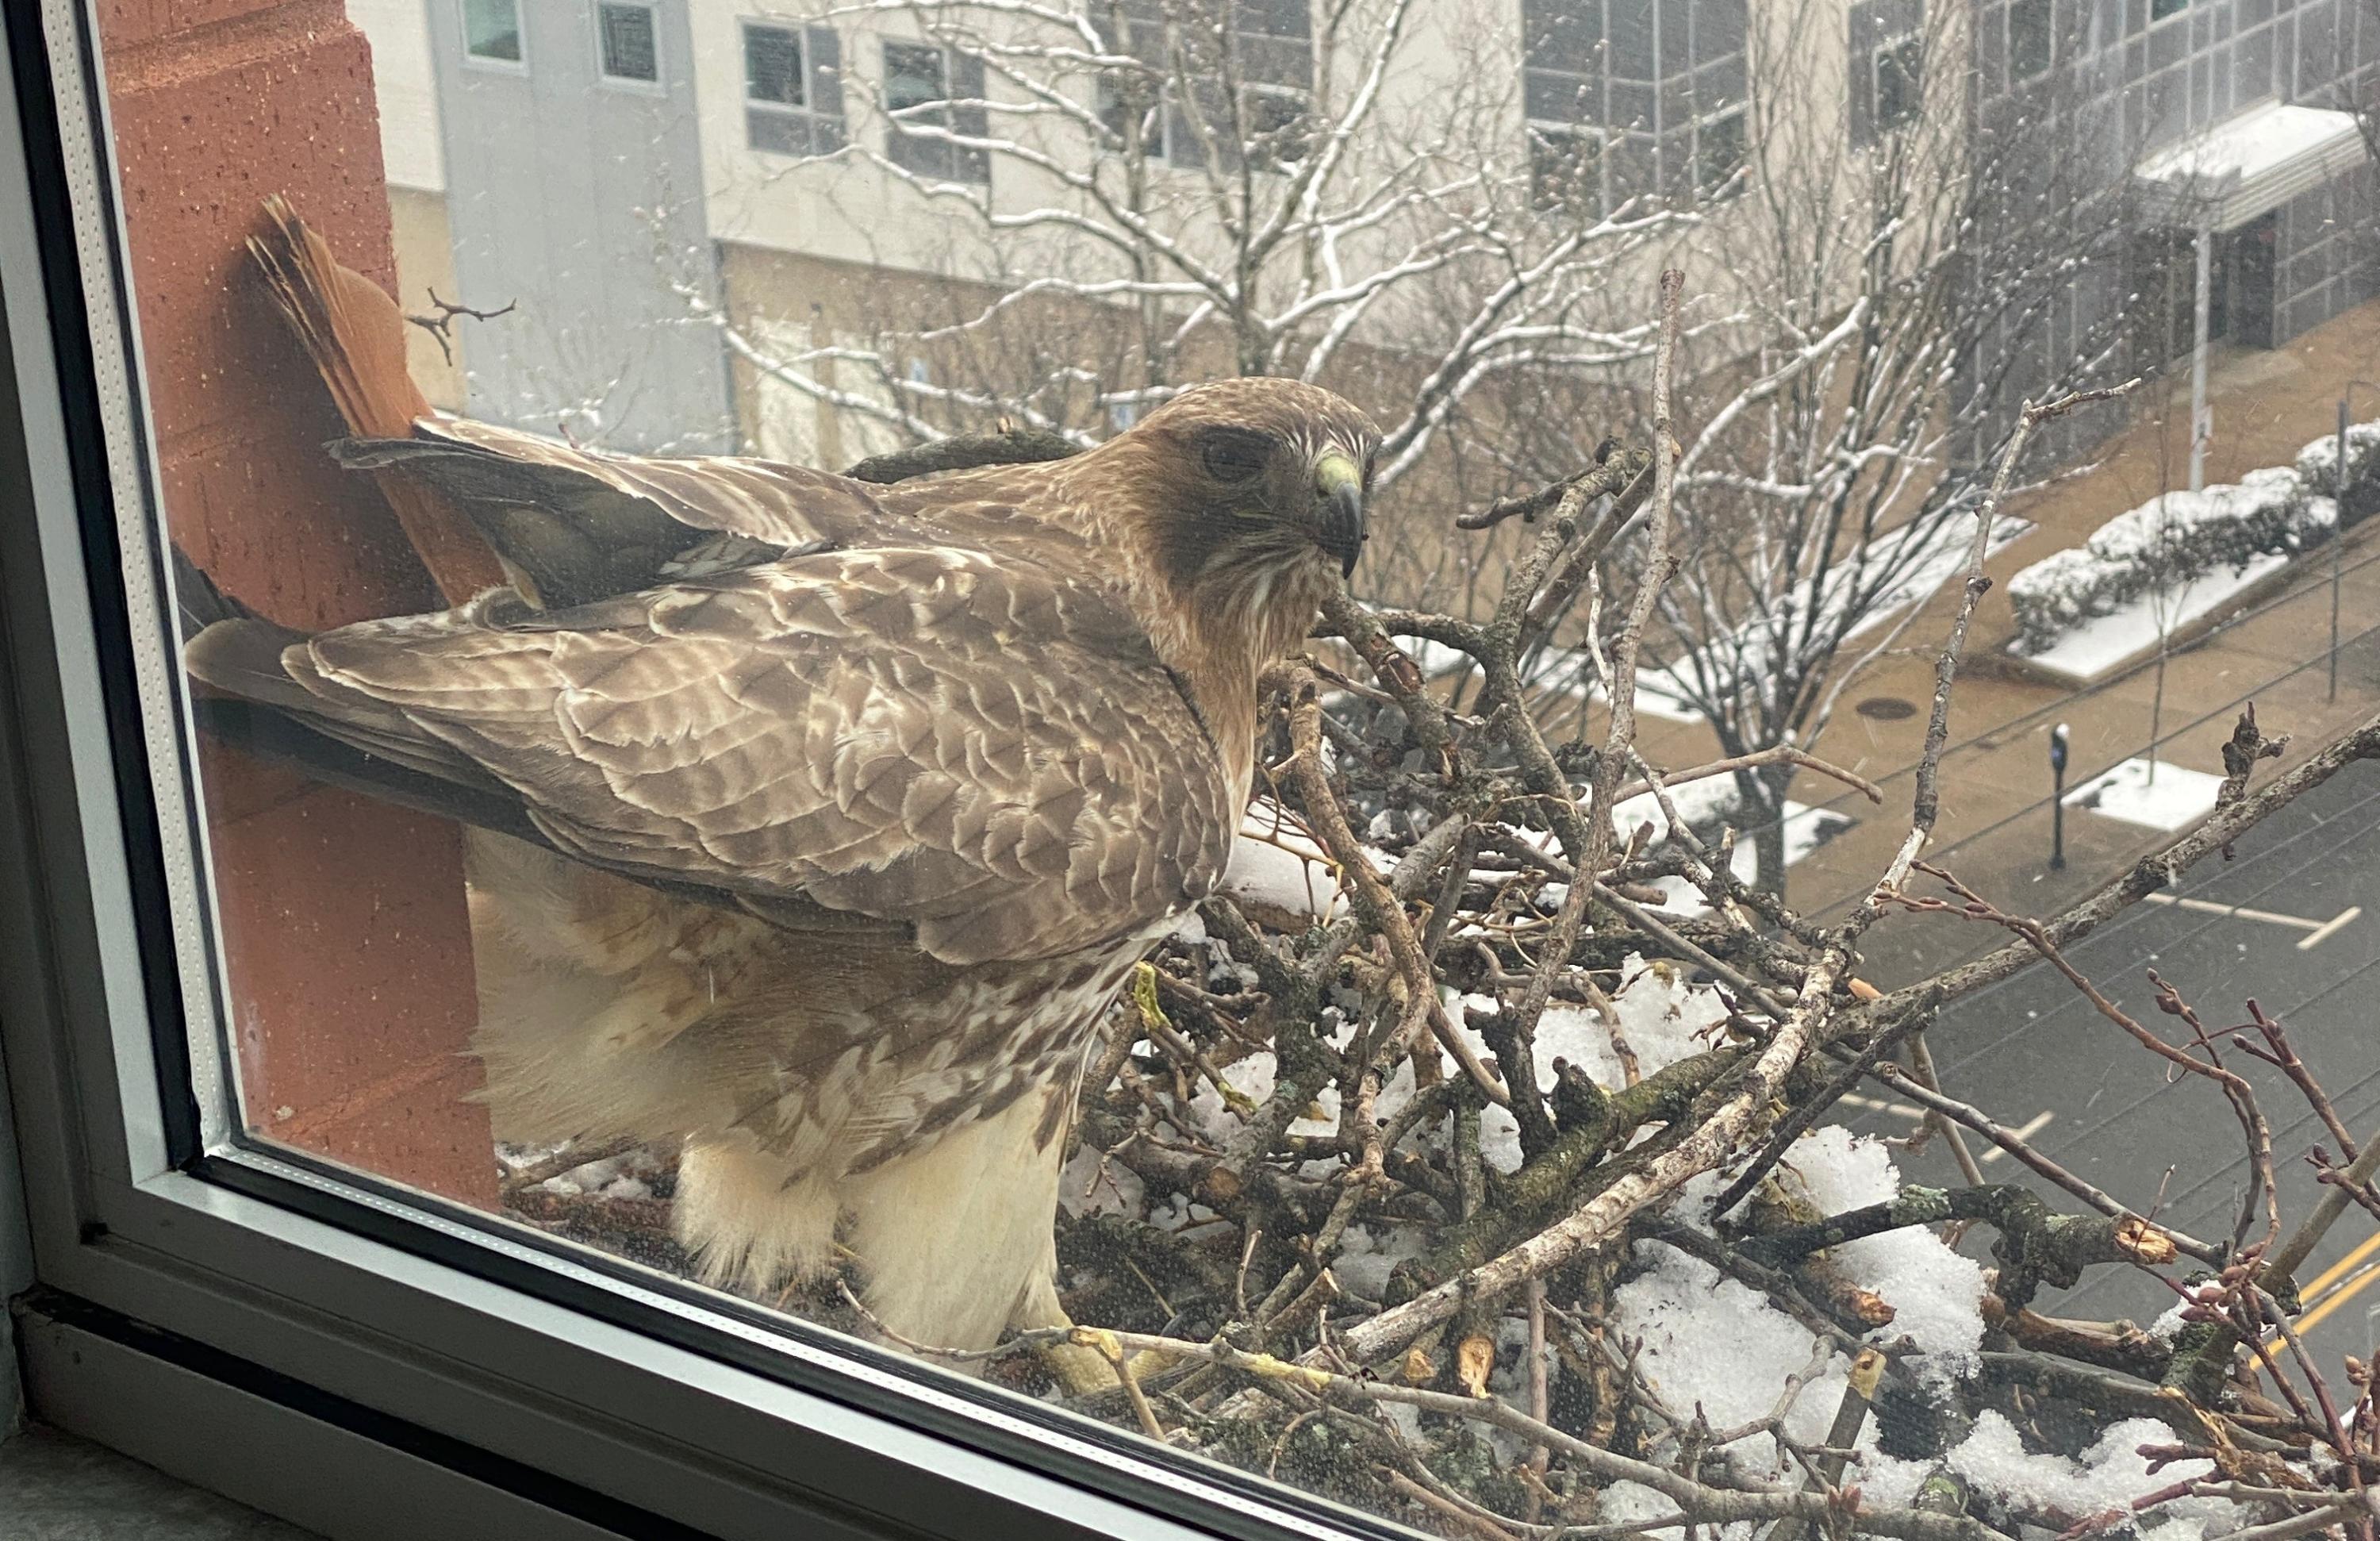 Look Up! Hawkwatch is here in New York